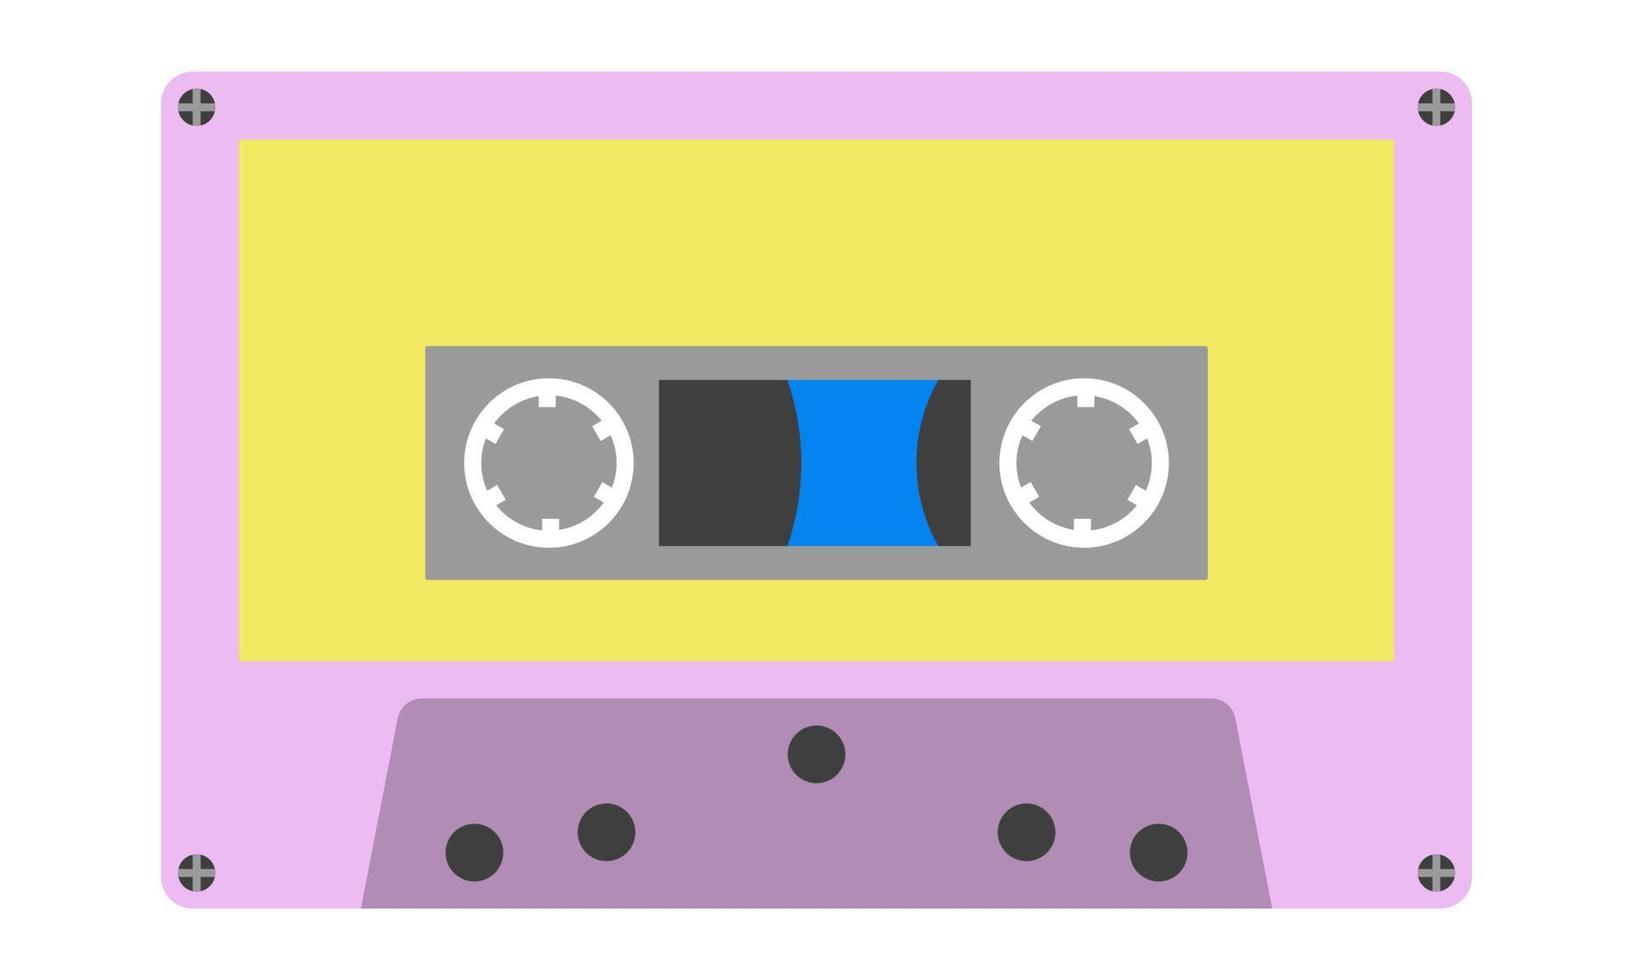 Audio cassette with magnetic tape. Device for recording sound. Attribute of the 80s, 90s. Flat style. Vector illustration